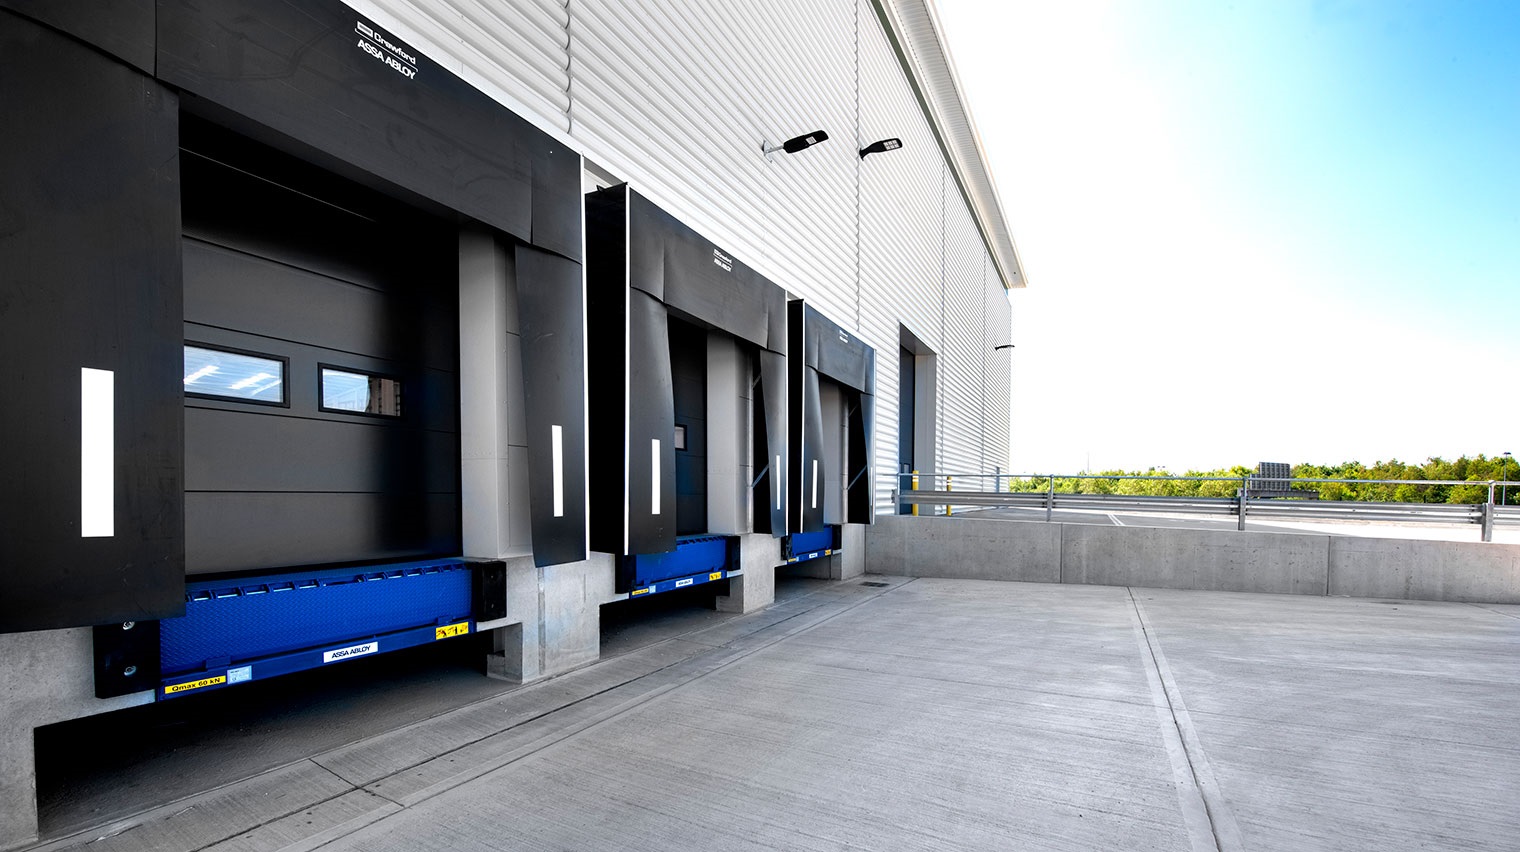 Well-built and high-performance loading dock equipment